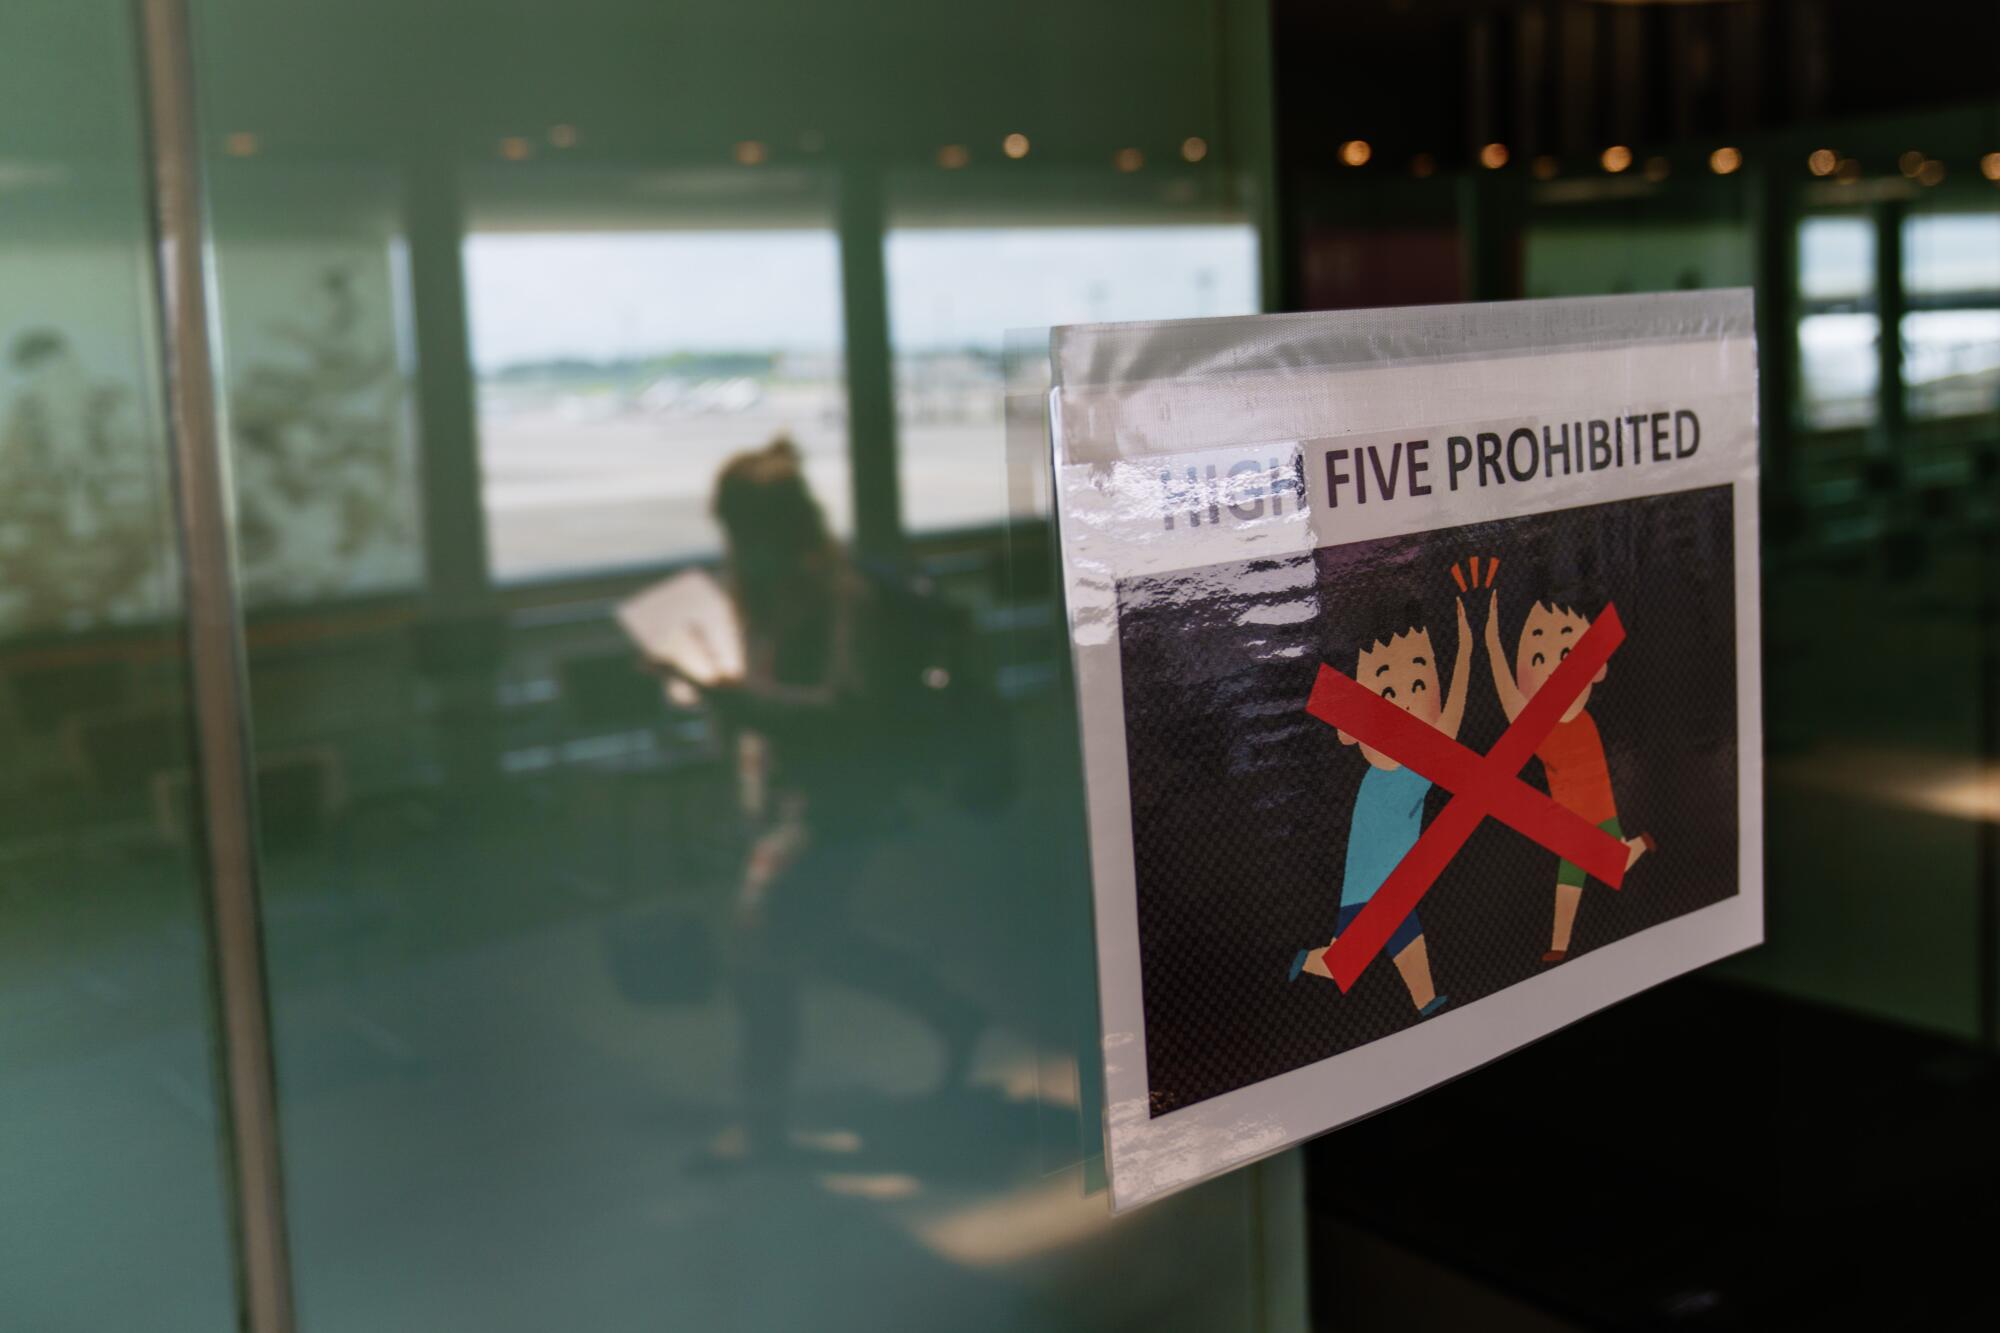 A sign says, "High five prohibited" 